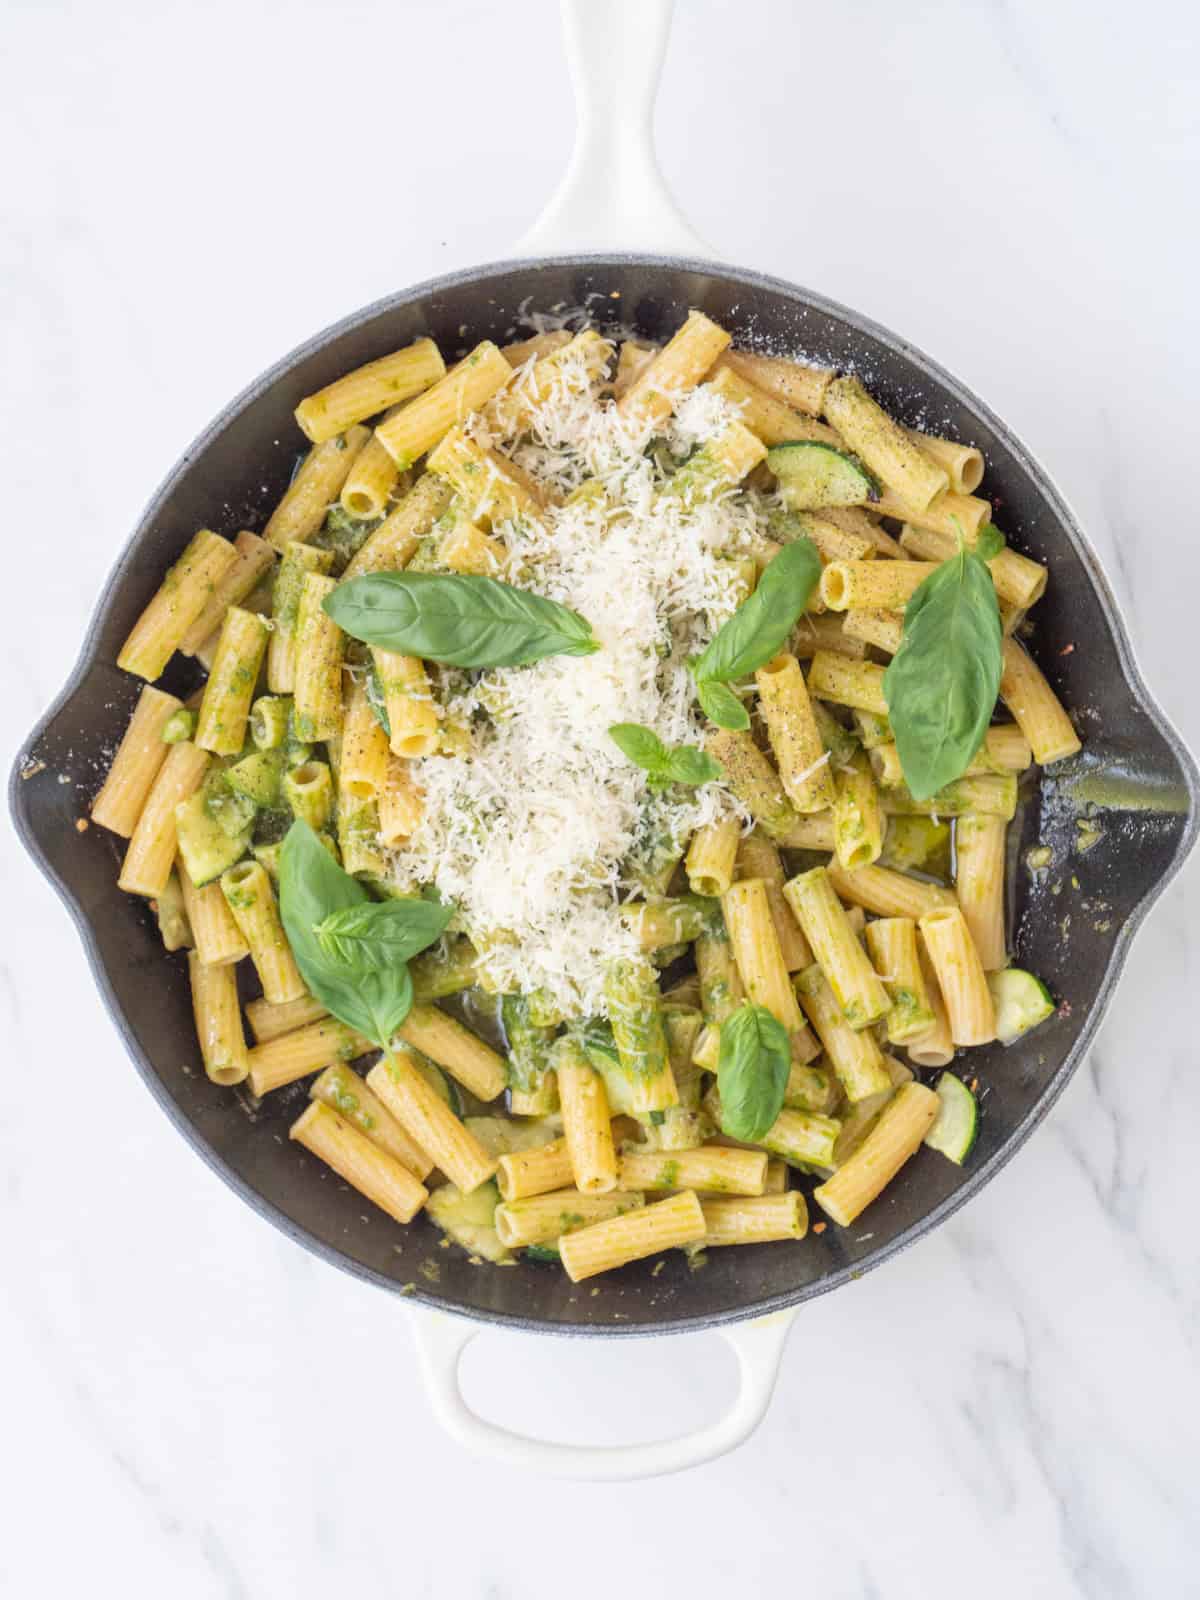 A skillet with basil vinaigrette pasta garnished with basil leaves and grated parmesan.